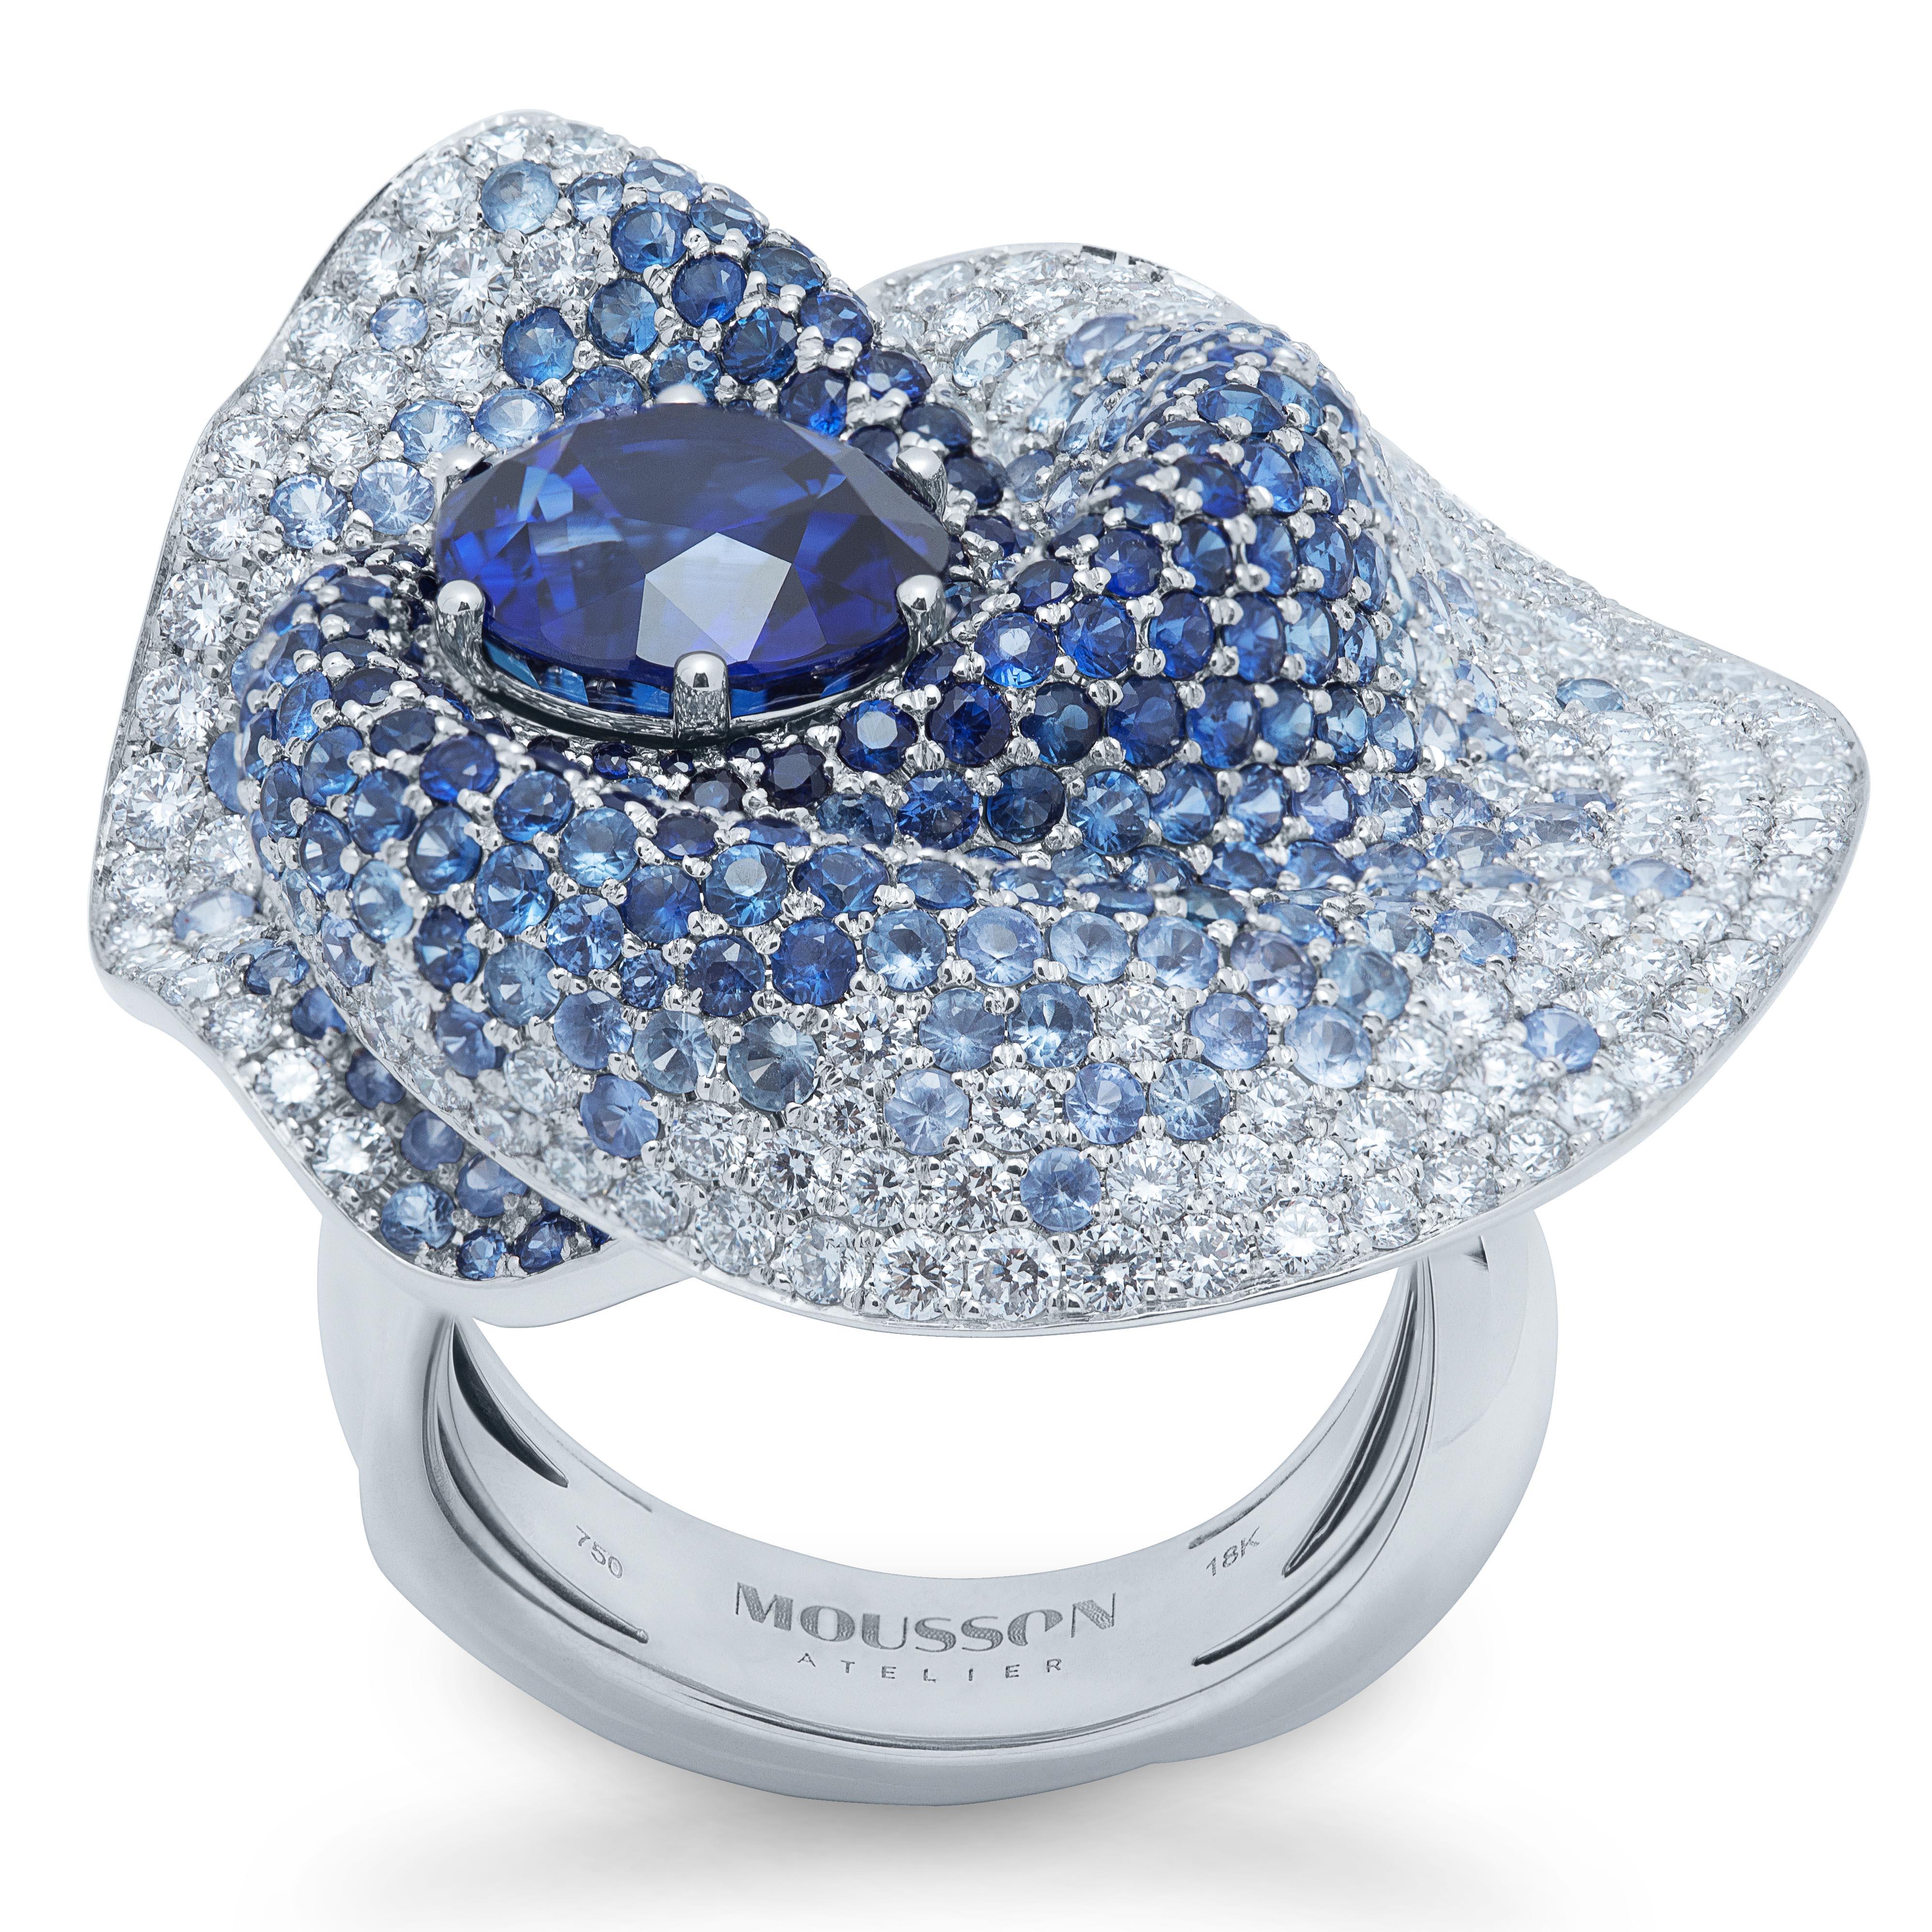 GRS Certified 4.33 Carat Sapphire Diamond 18 Karat White Gold Ring
Our new Ring from 